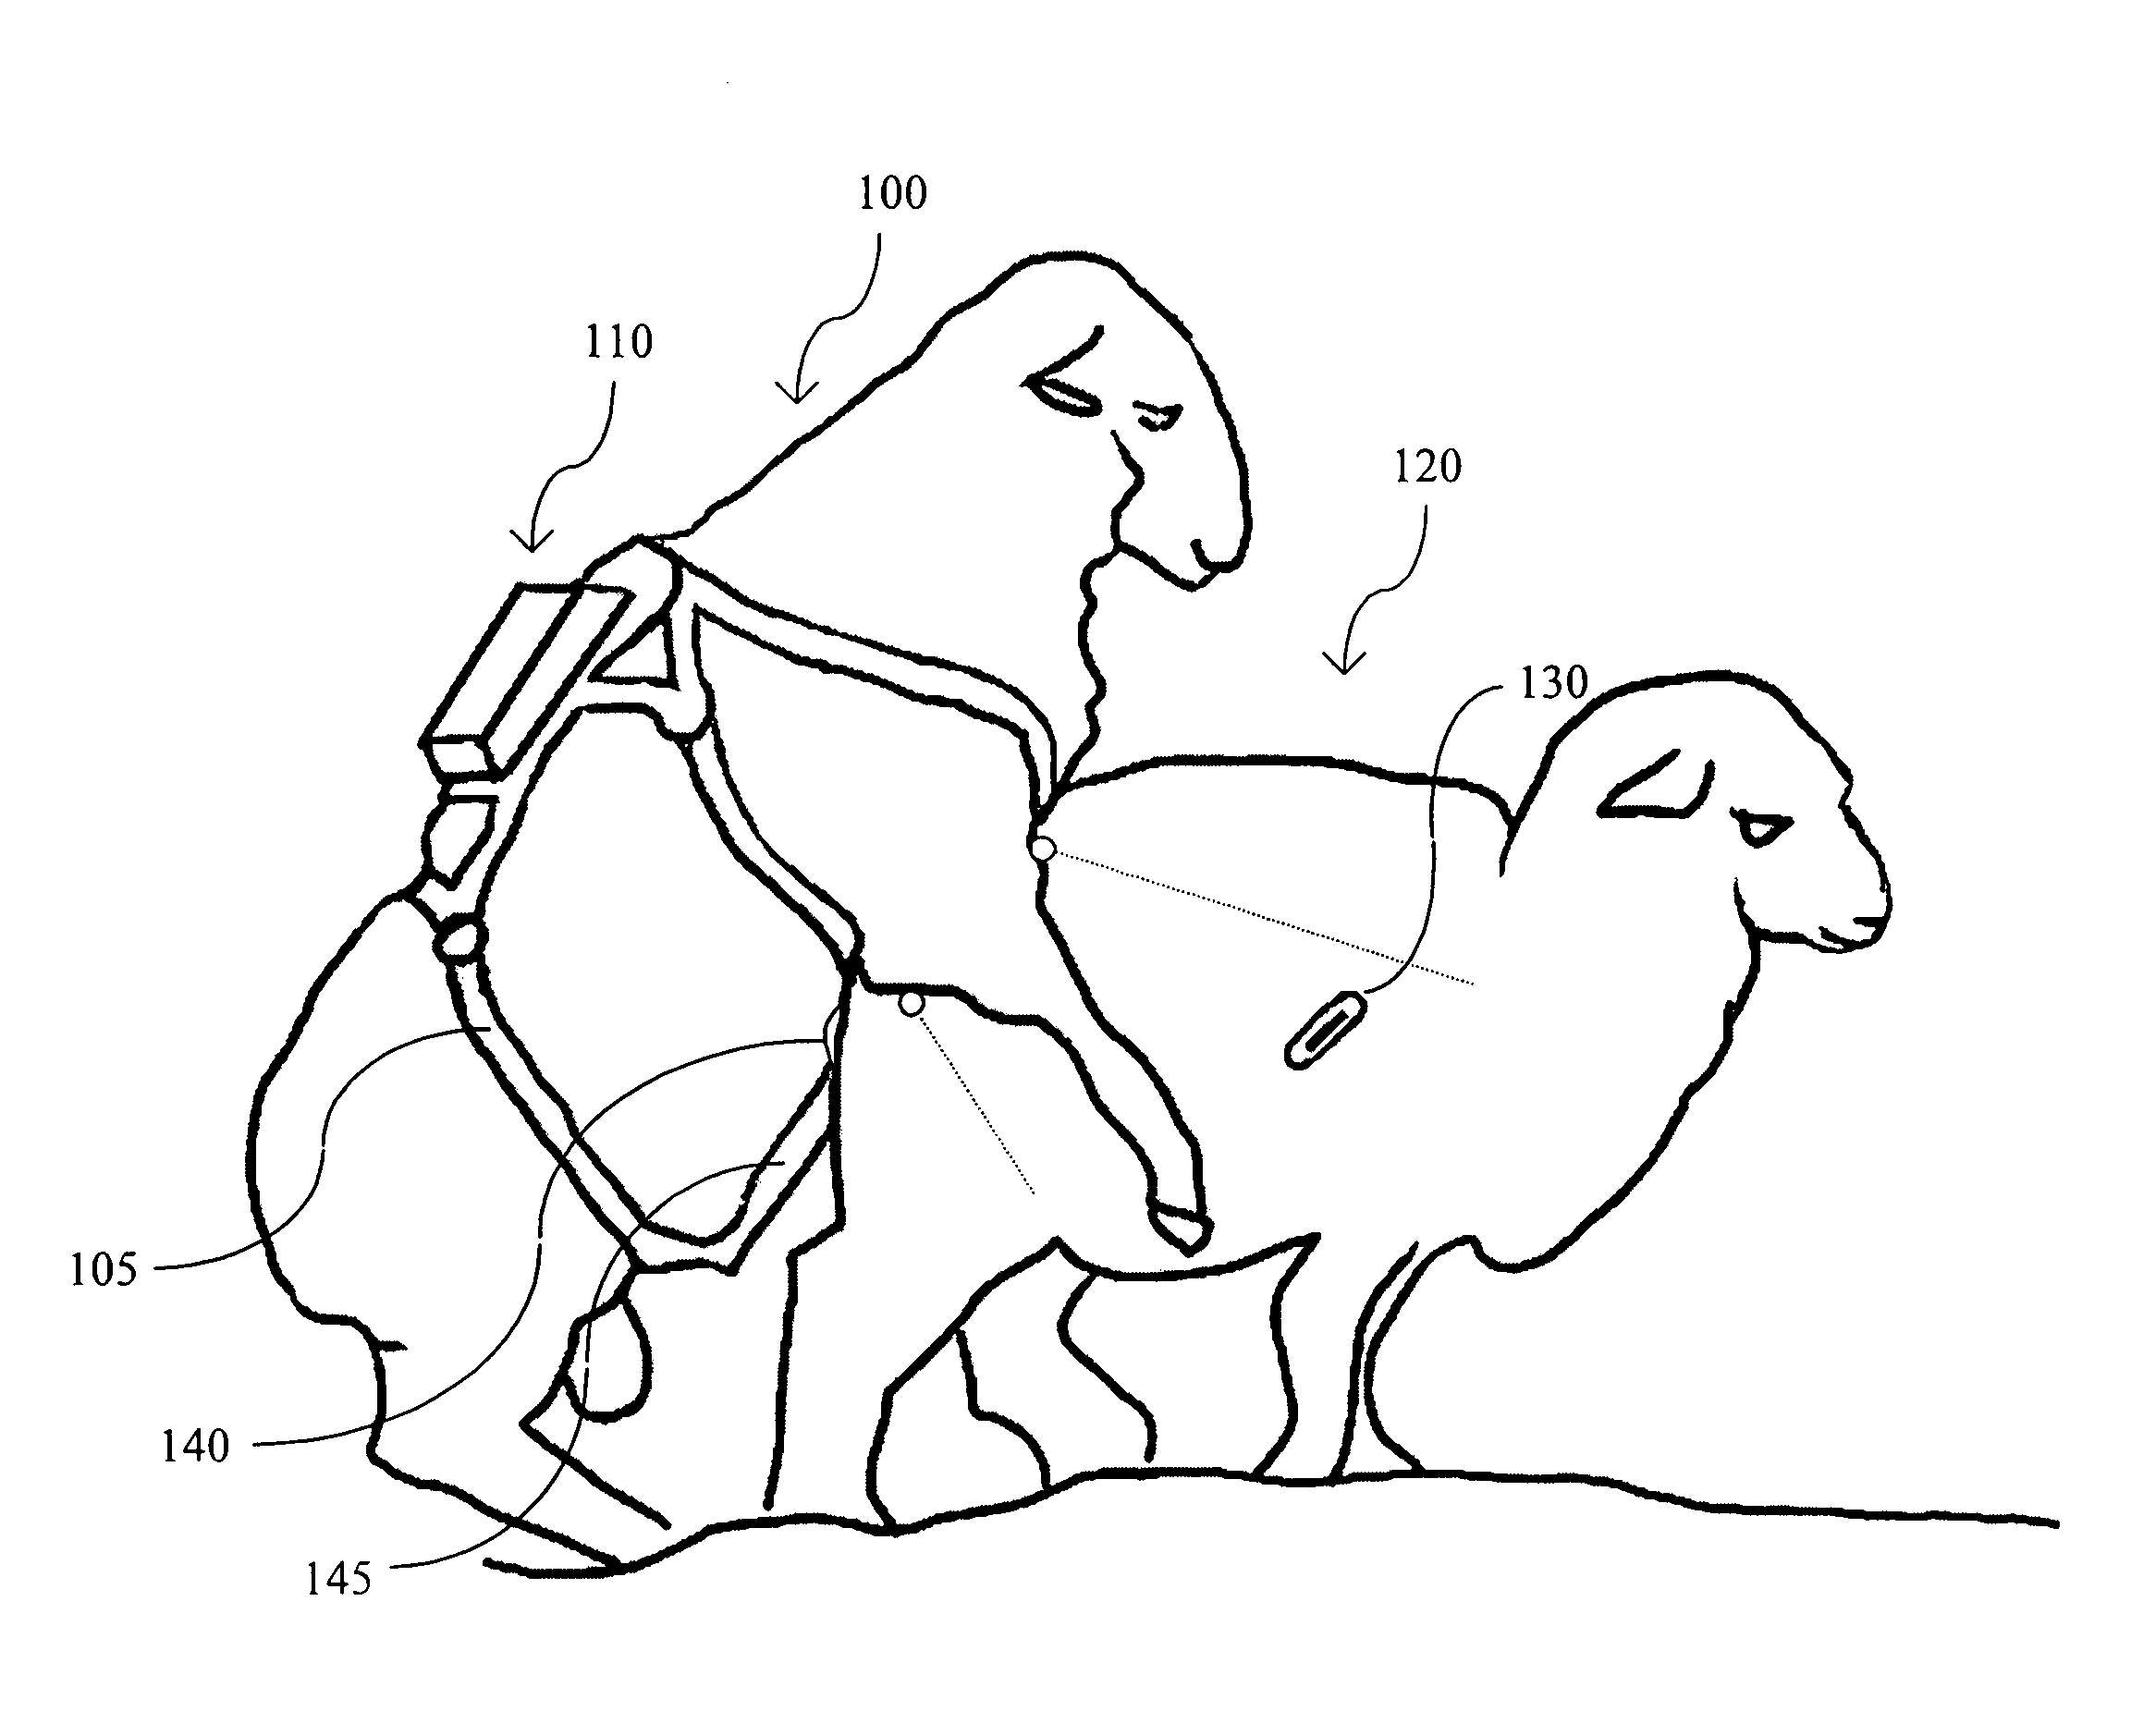 Method and Device for Automatically Detecting Mating of Animals